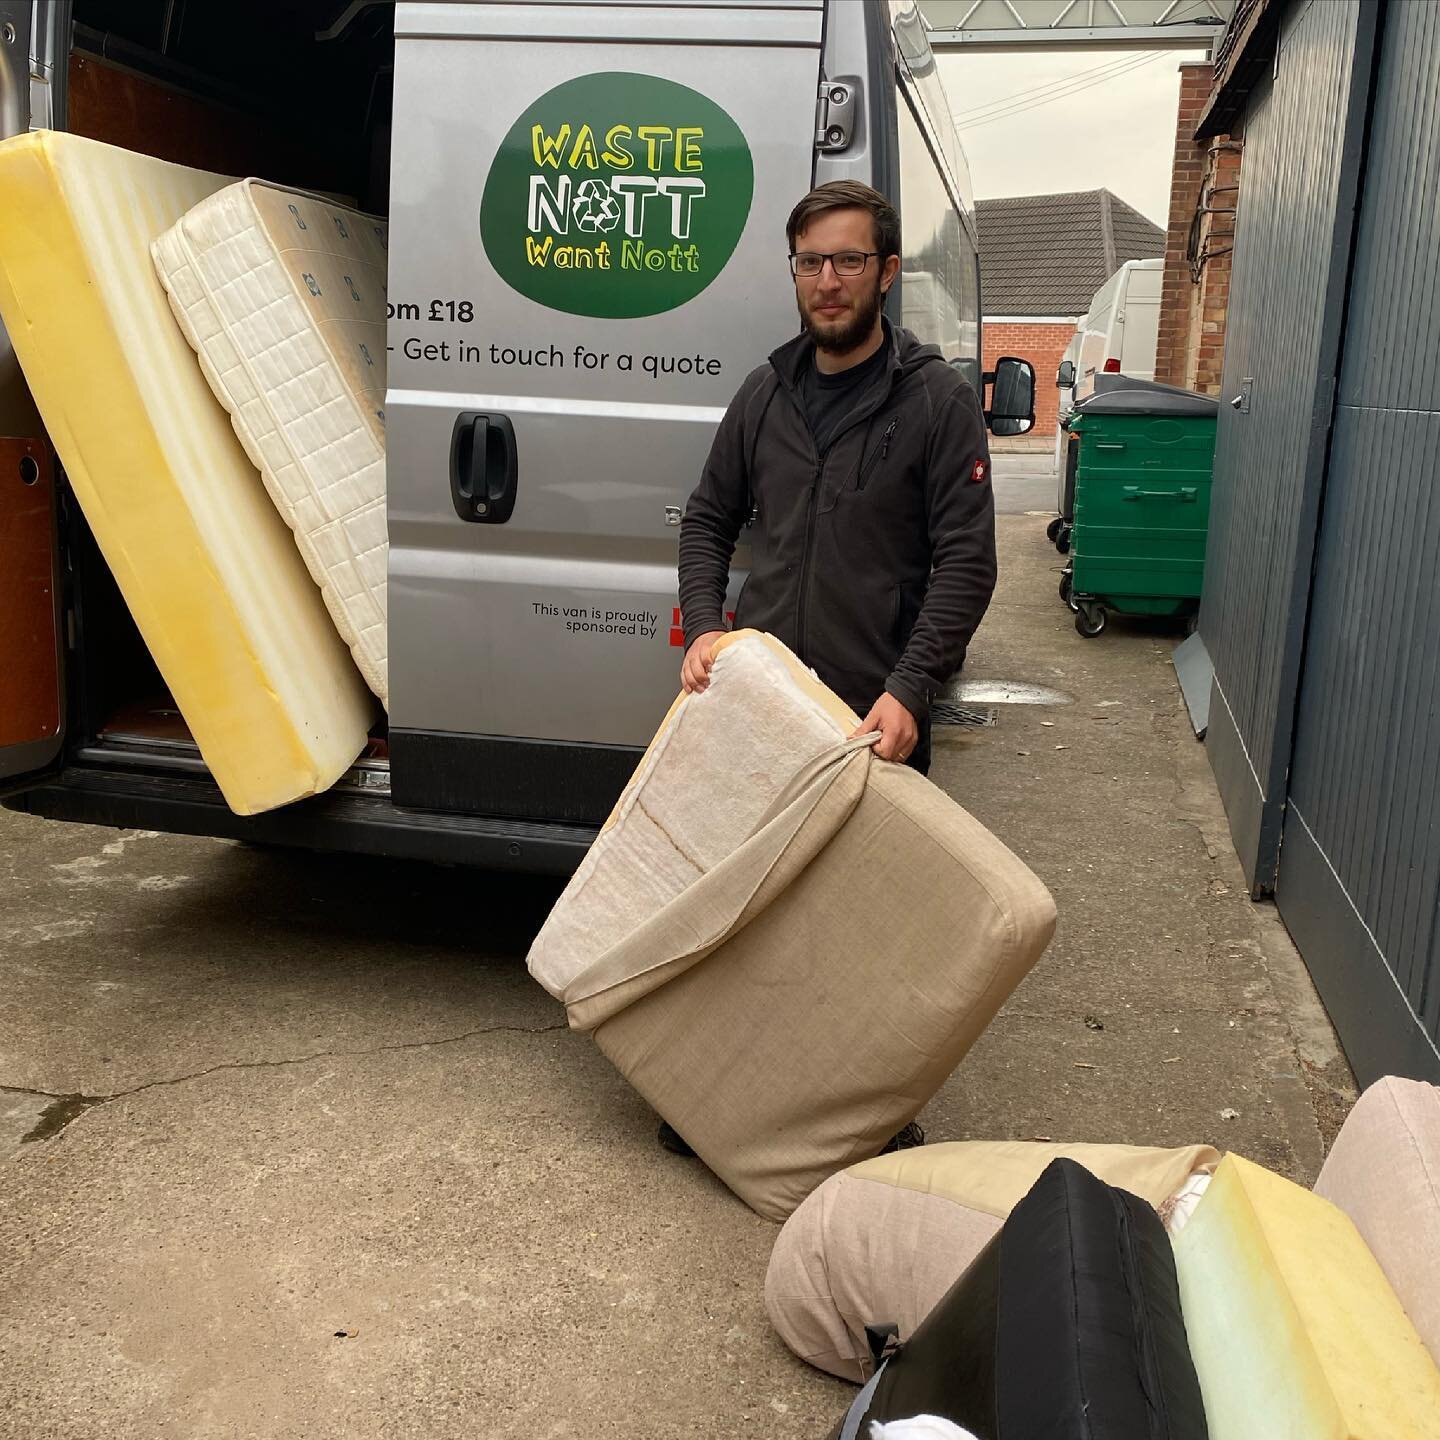 We cannot wait to see your #upcycledfurniture @changdoesthings &amp; @rossbrisk 🥰♻️🚛
.
What a great way to create the perfect sofa for your #campervanconversion and help the environment at the same time 👏🏼
.
Love our #notts community 🥰
.
.
#camp